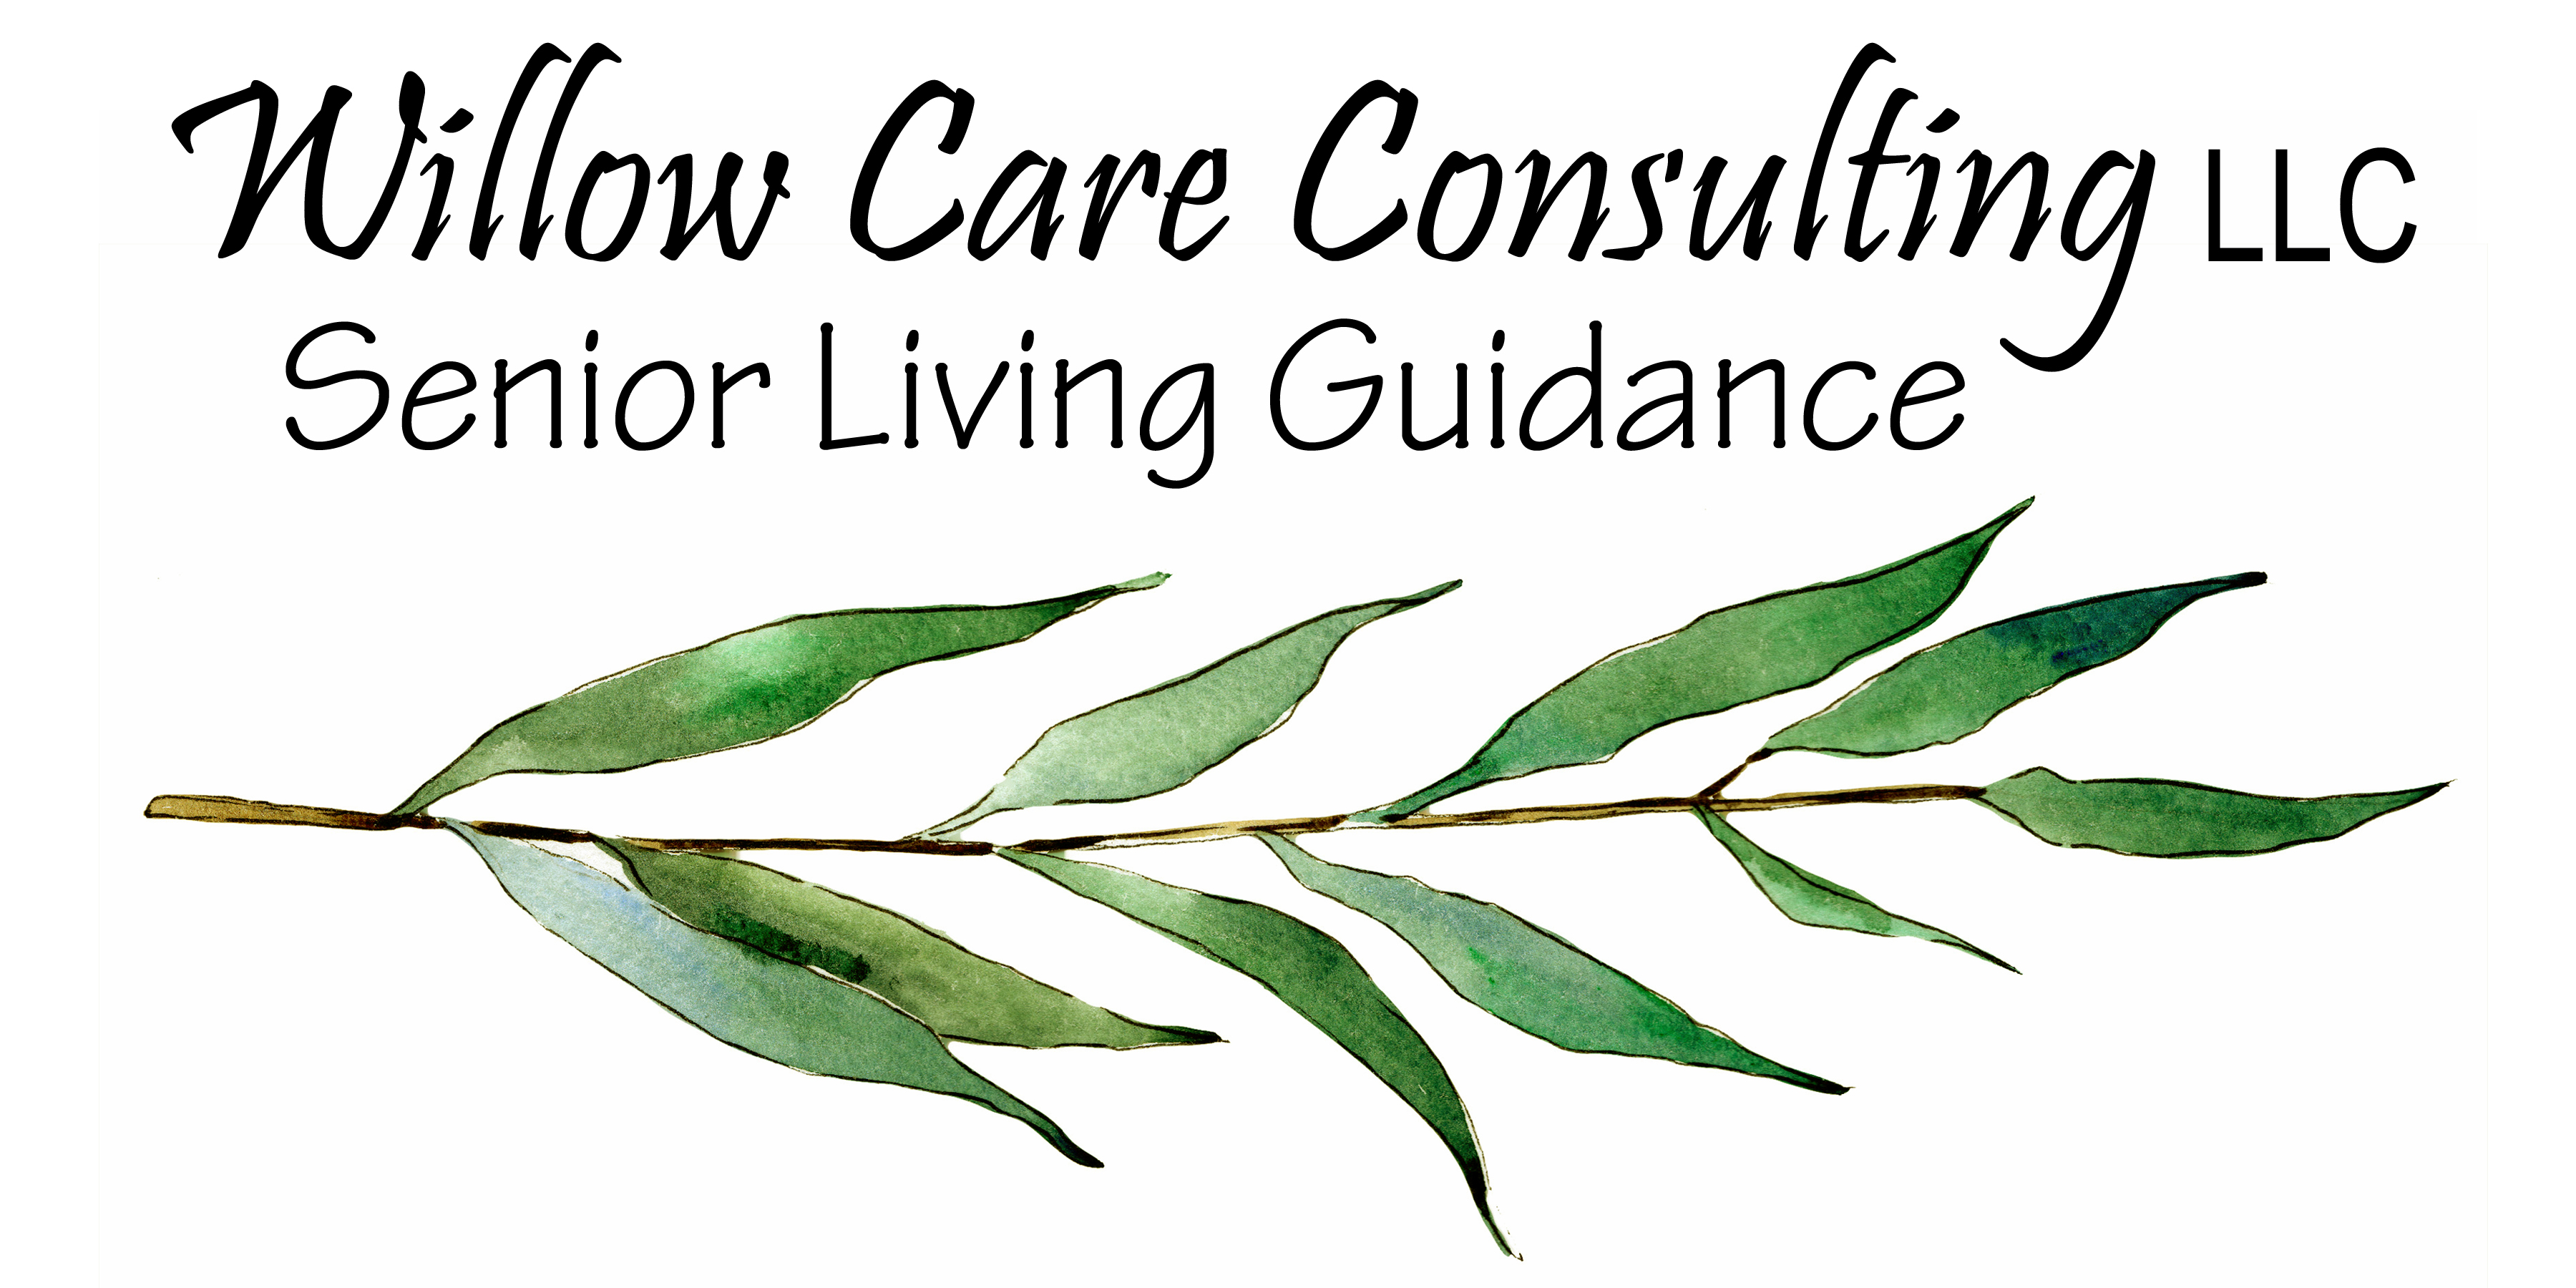 #4 b Willow Care Consulting, LLC (Silver)